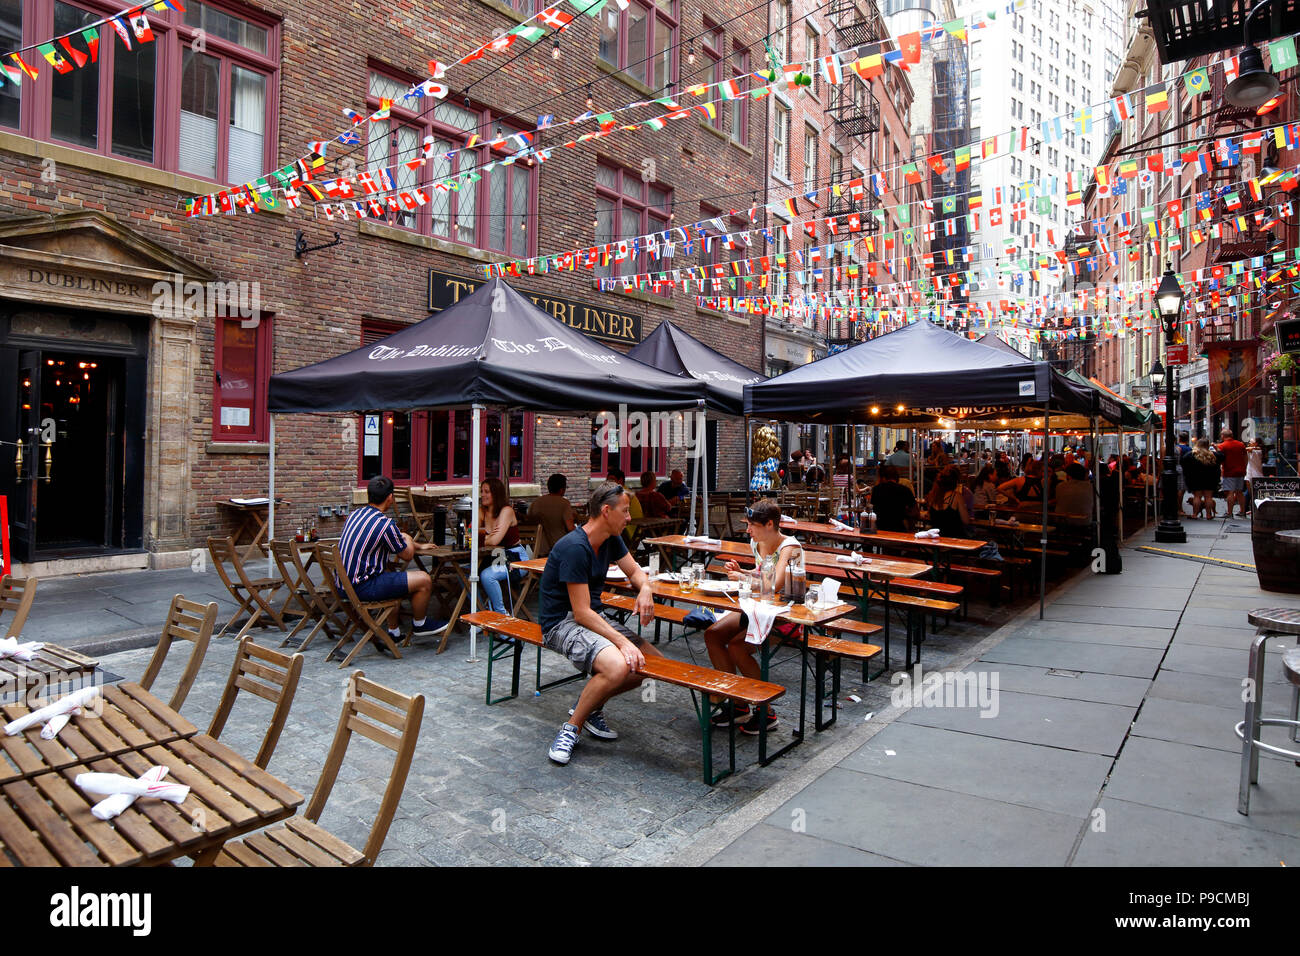 picnic tables setup for outdoor dining on Stone Street in Lower Manhattan, New York, NY. Stock Photo